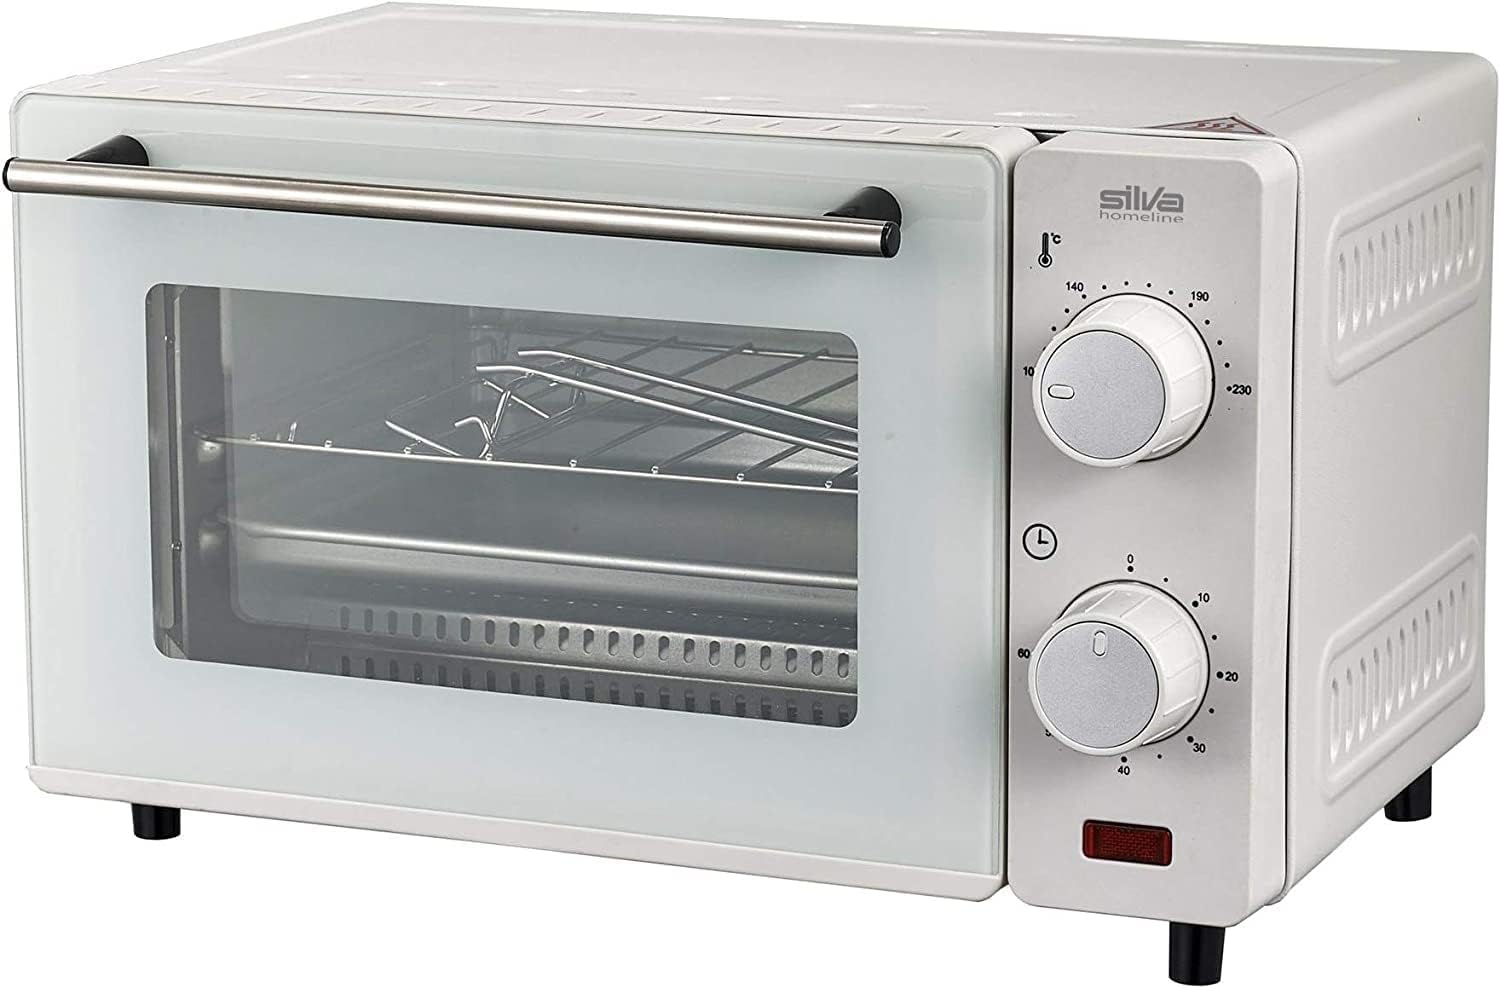 silva homeline mb9500 electric mini oven and grill 9l capacity 650w 100 230c review